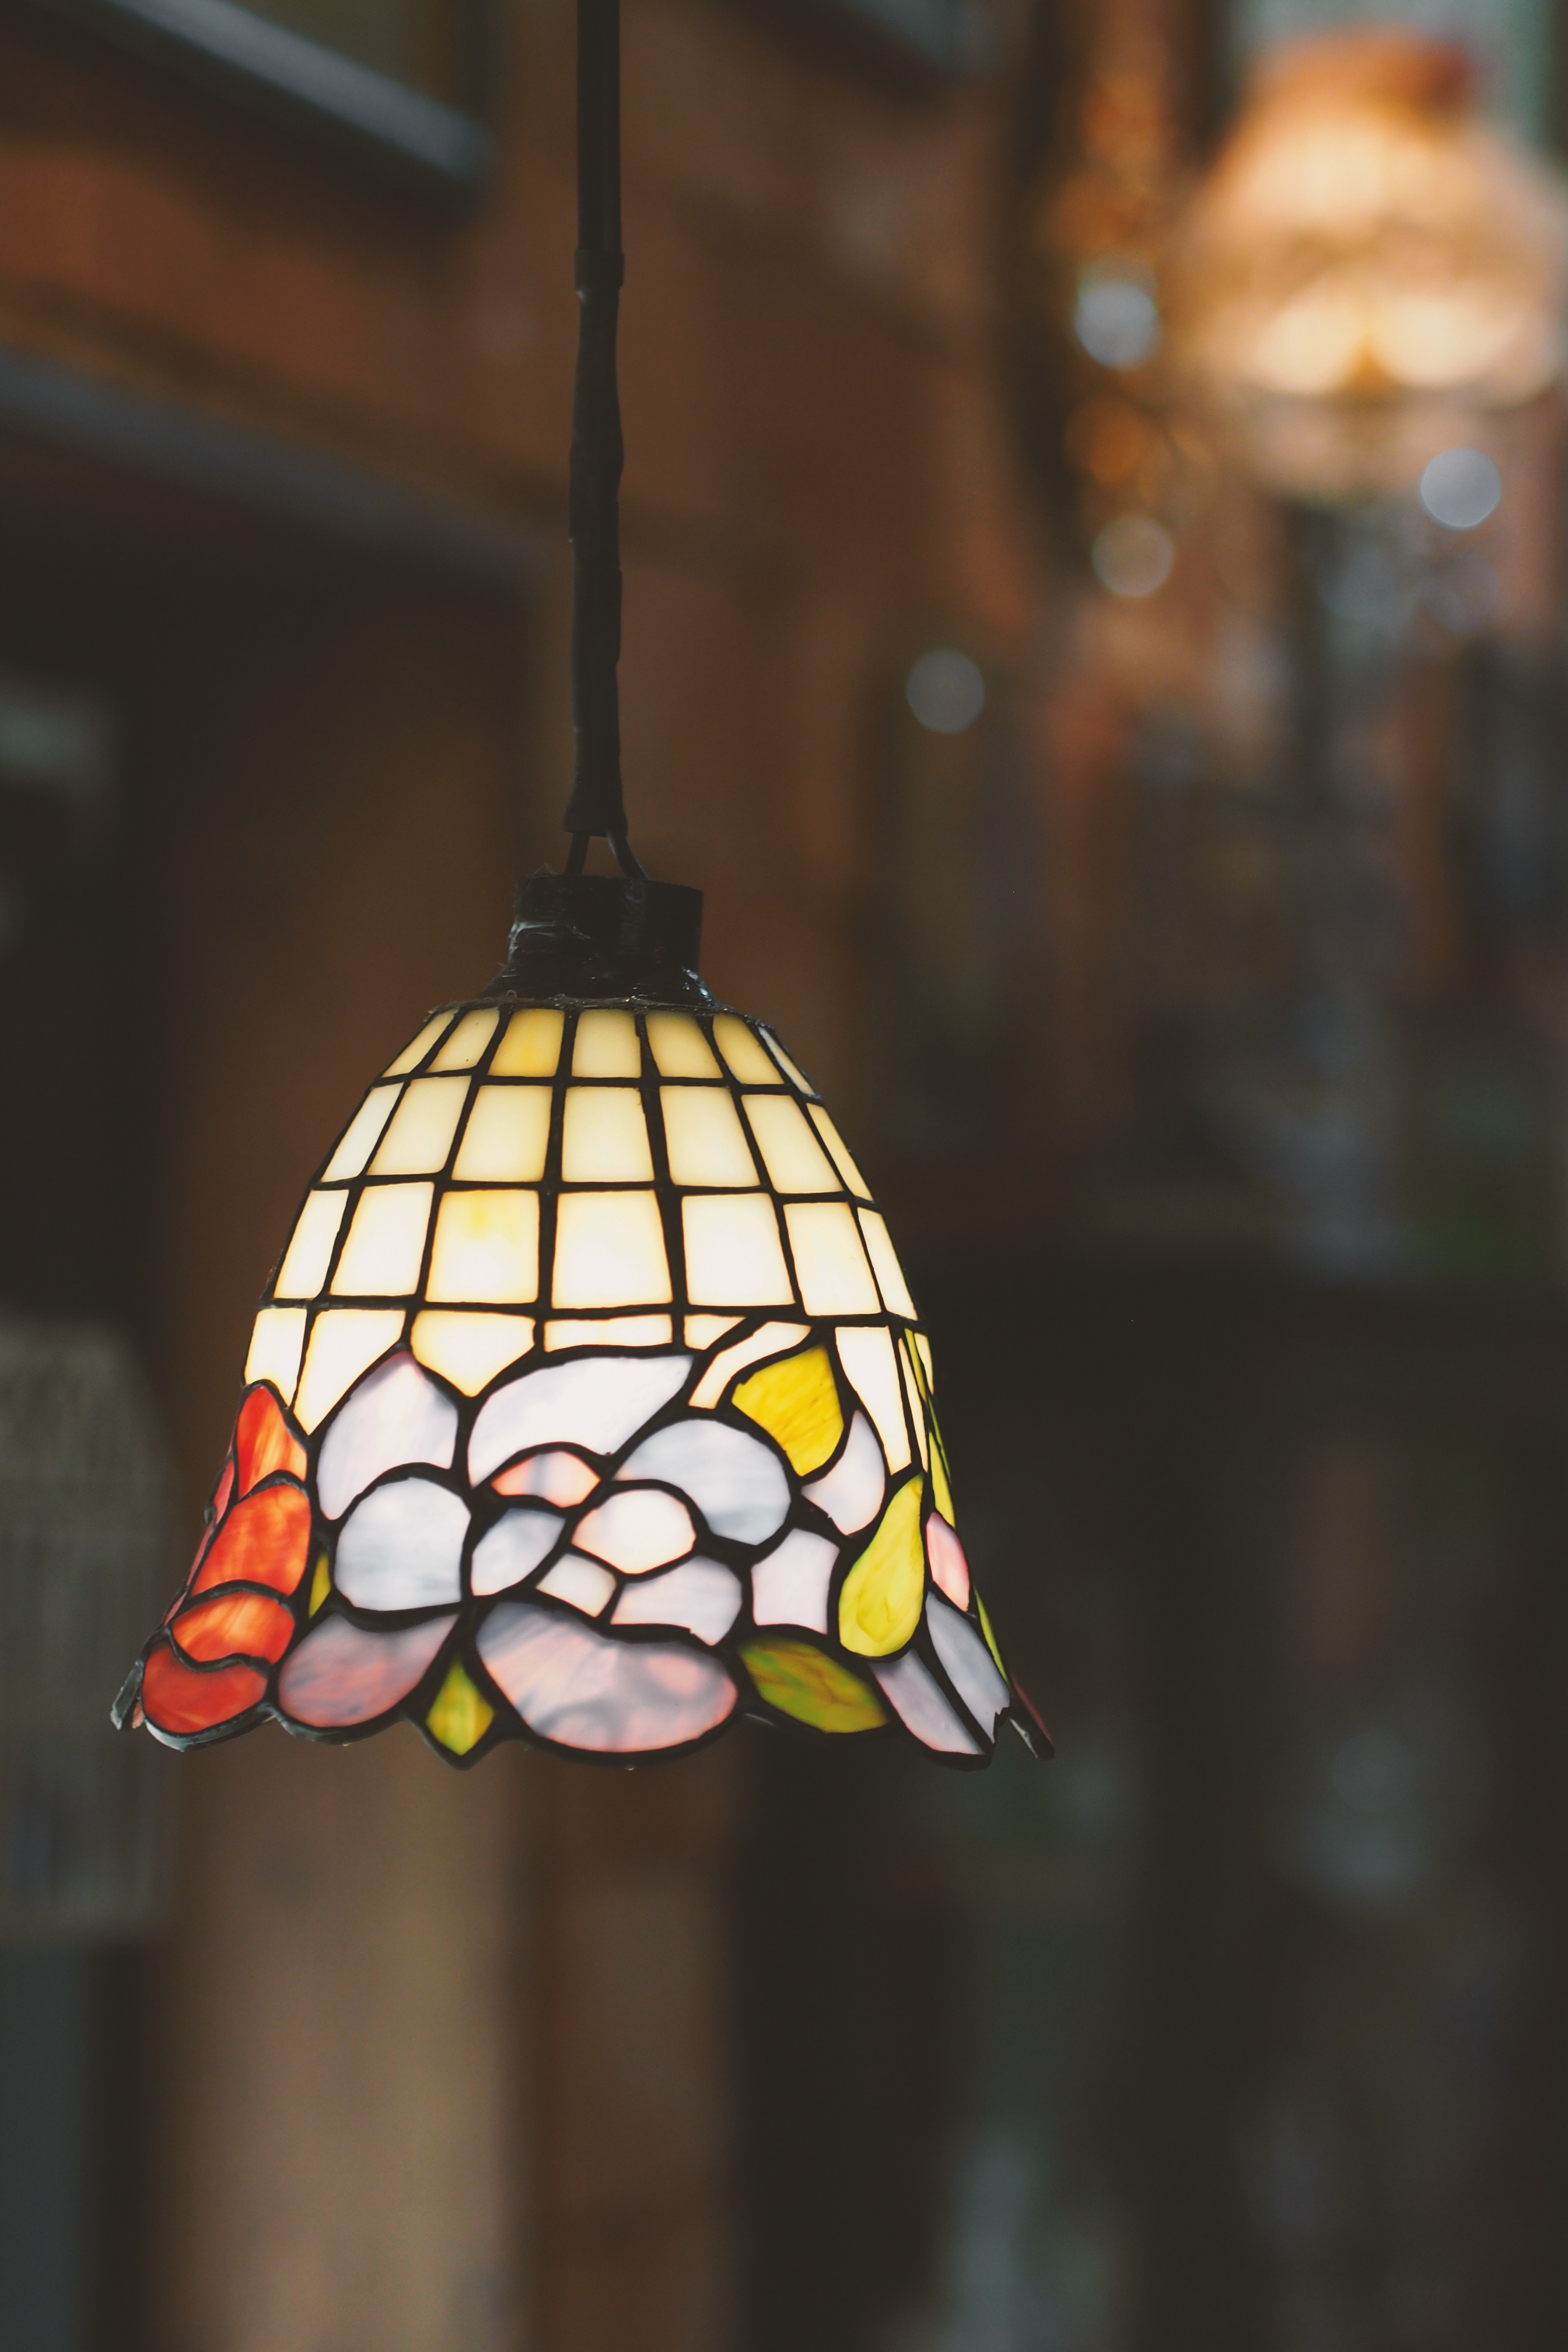 stained glass, miscellanea, miscellaneous, multicolored, motley, glass, lamp, curtain wall, shade, lampshade 1080p